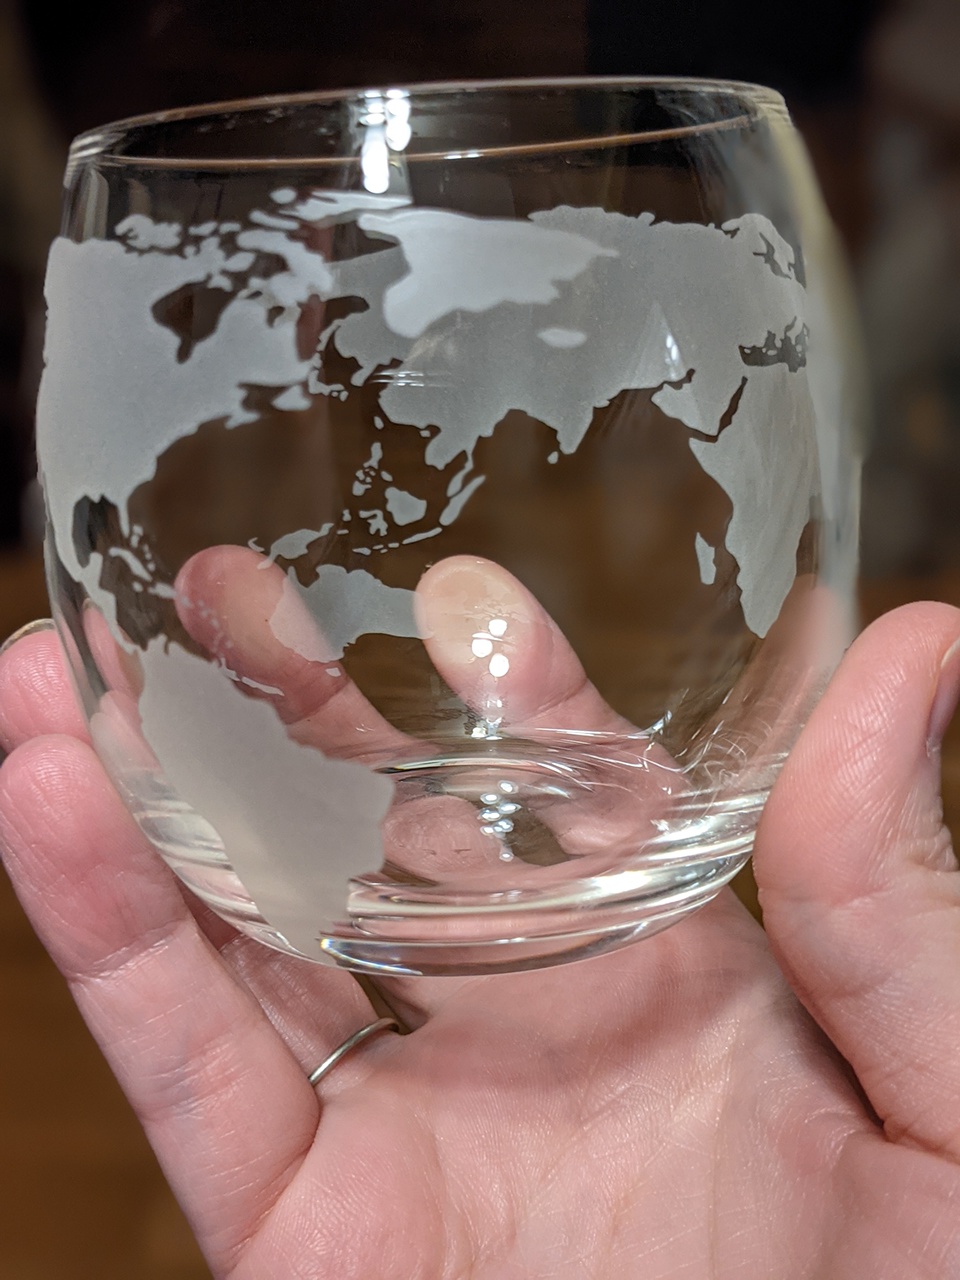 Cup with a world etched on it